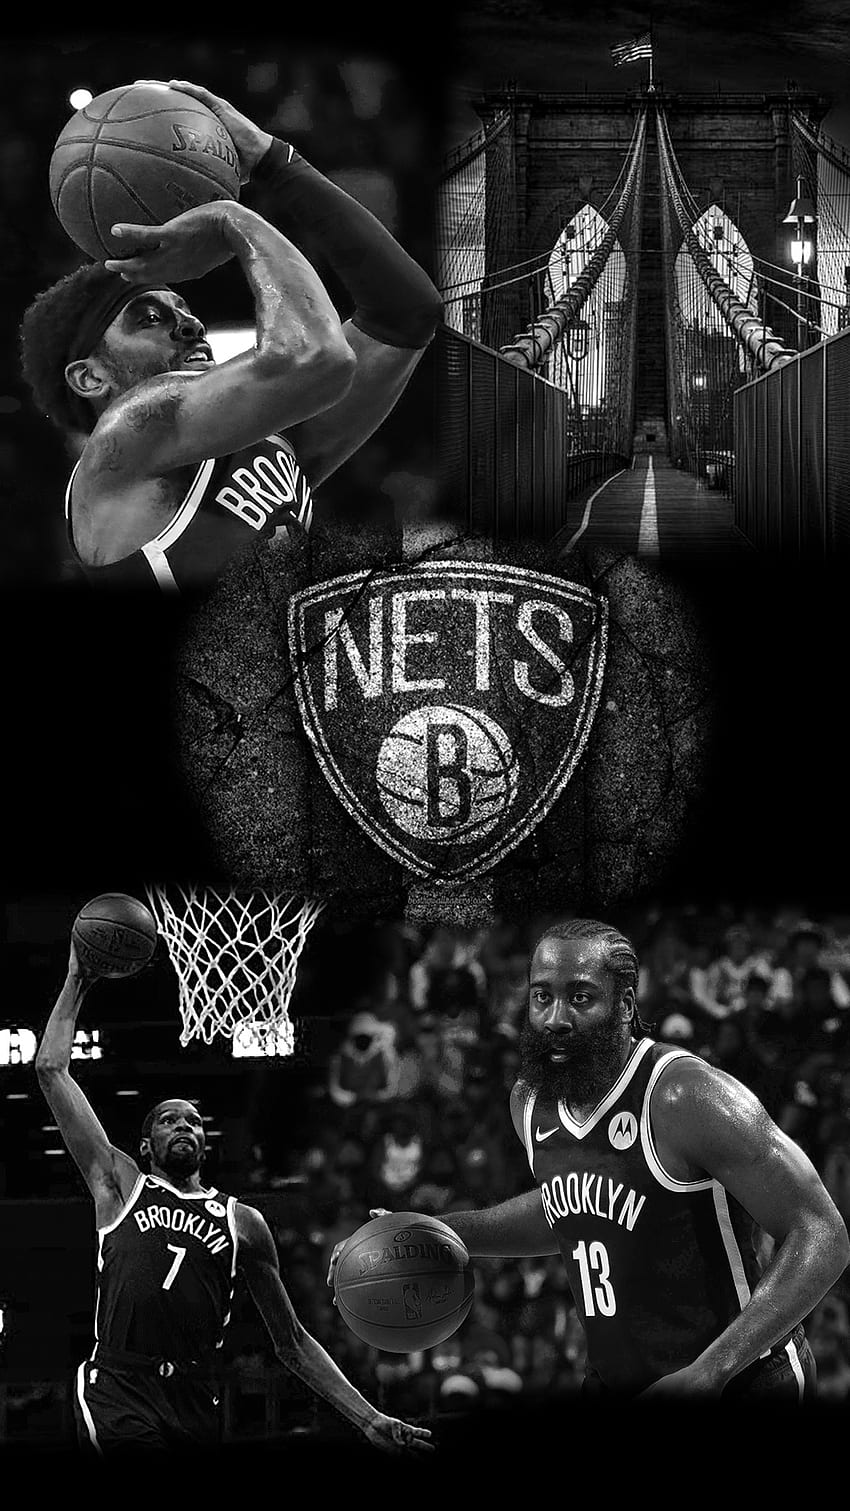 Brooklyn Nets on X Some new faces new wallpapers   WallpaperWednesday httpstcovRVQB4vD5x  X